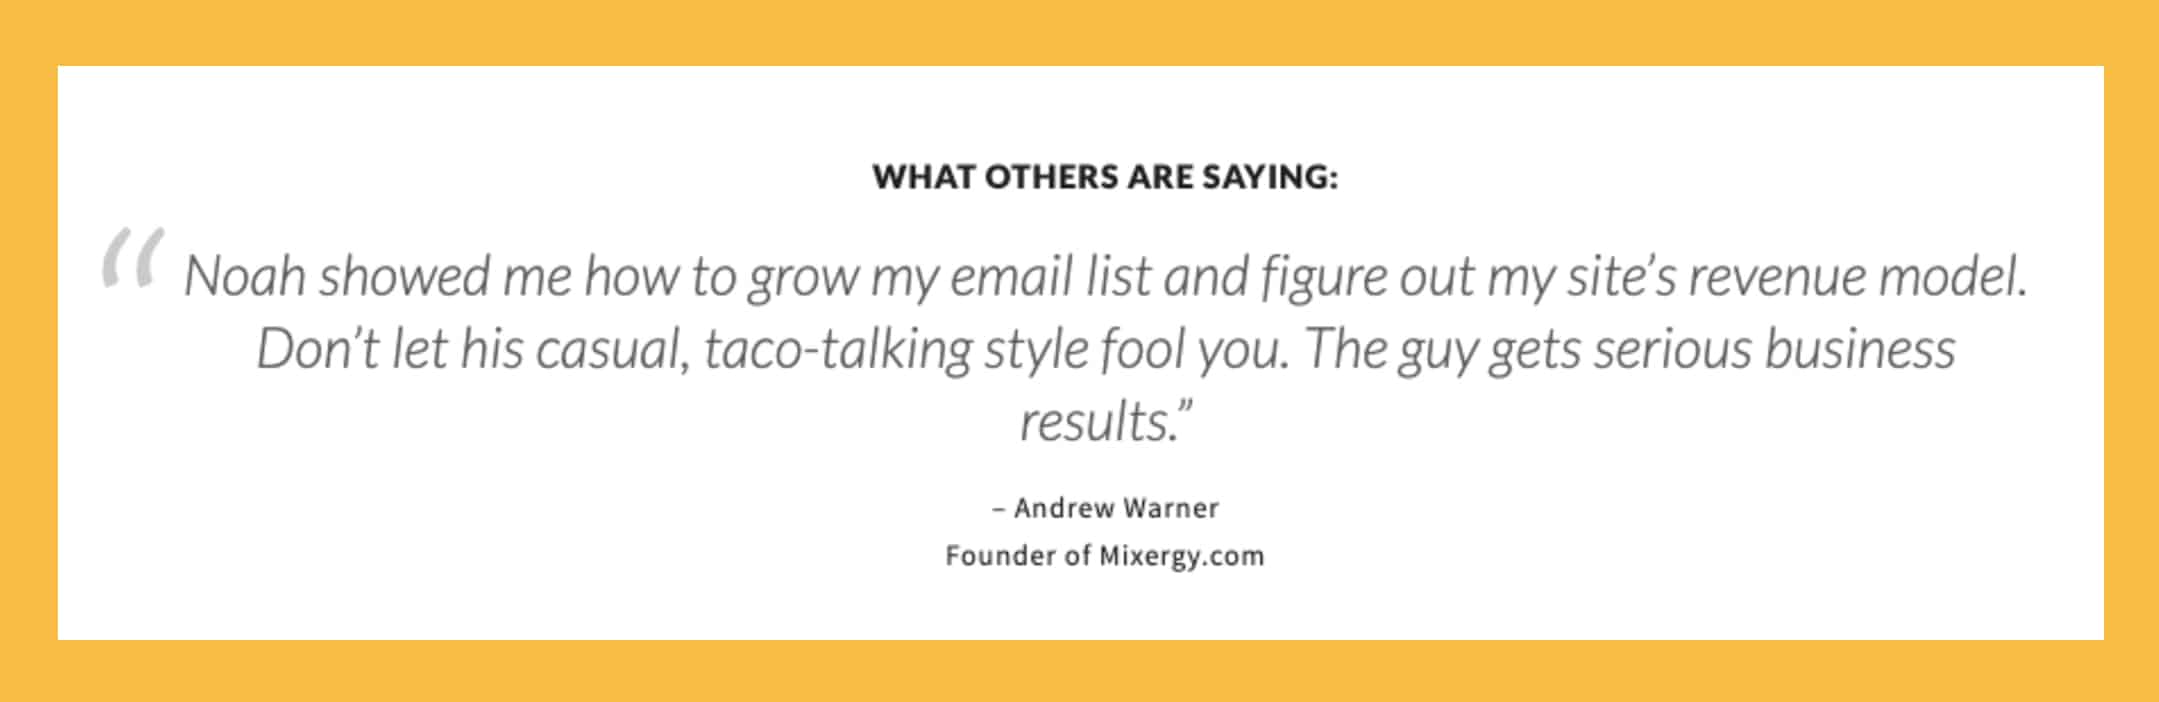 Noah showed me how to grow my email list and figure out my site’s revenue model. Don’t let his casual, taco-talking style fool you. The guy gets serious business results. - Andrew Warner, Founder of Mixergy.com